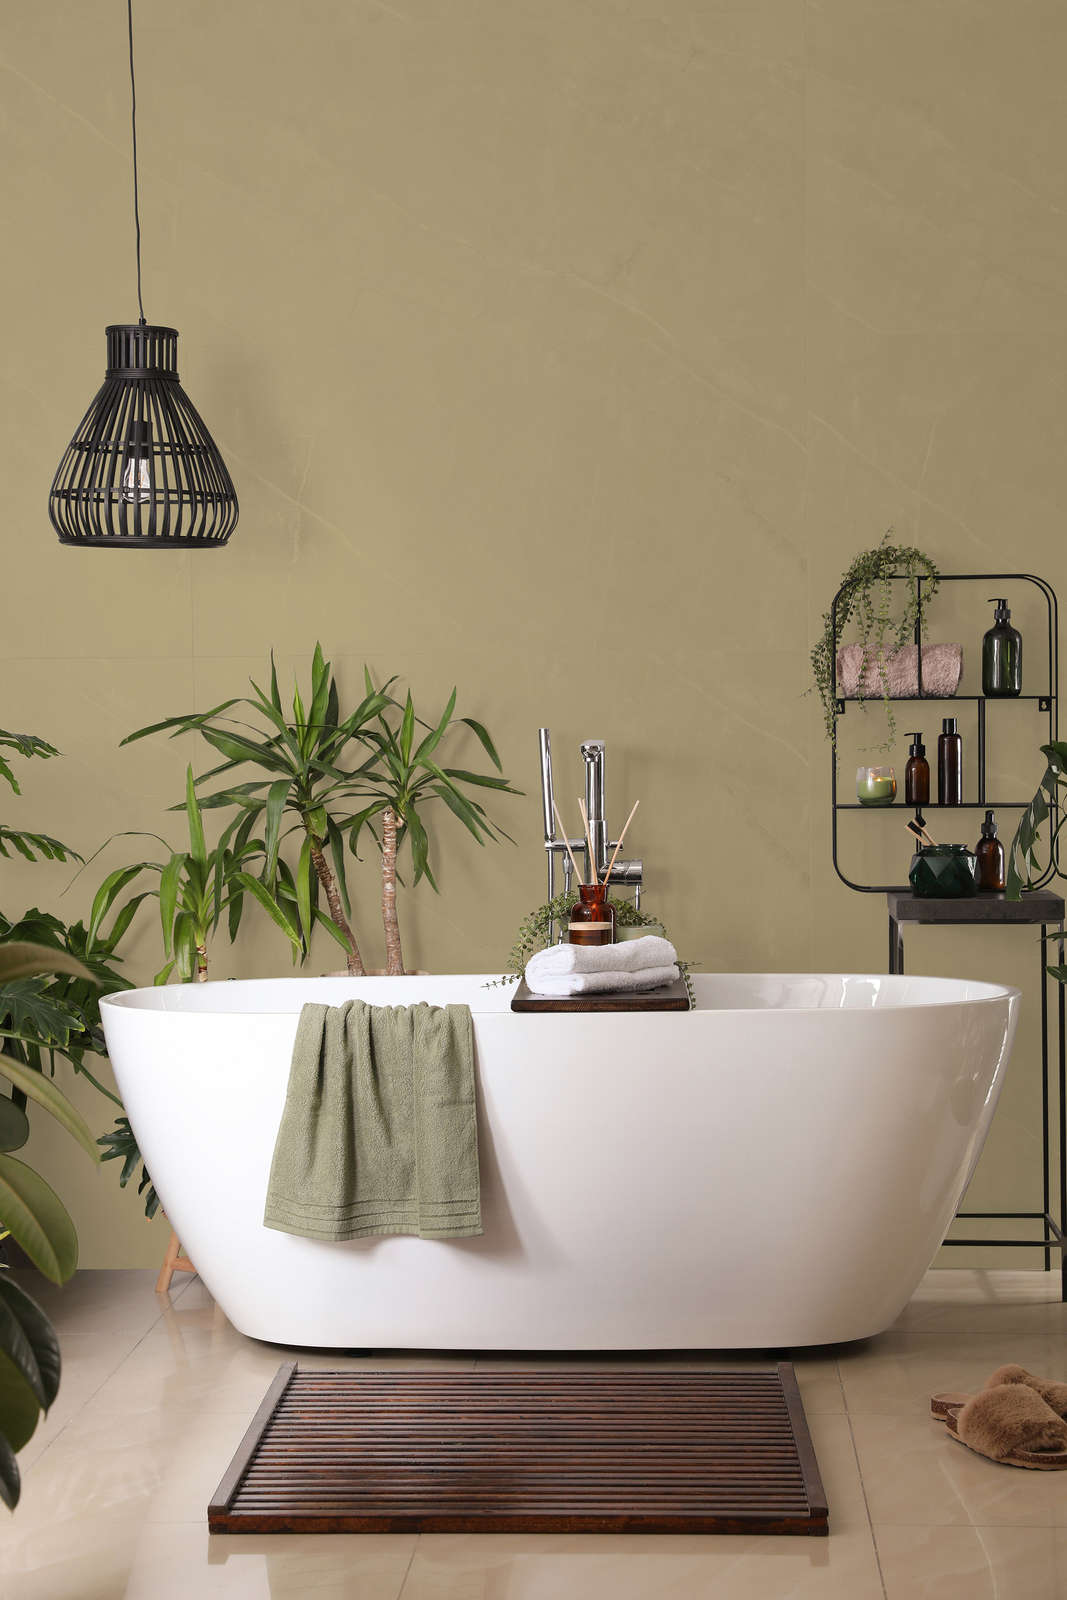             Premium Wall Paint Soothing Khaki »Lucky Lime« NW606 – 2.5 litre
        